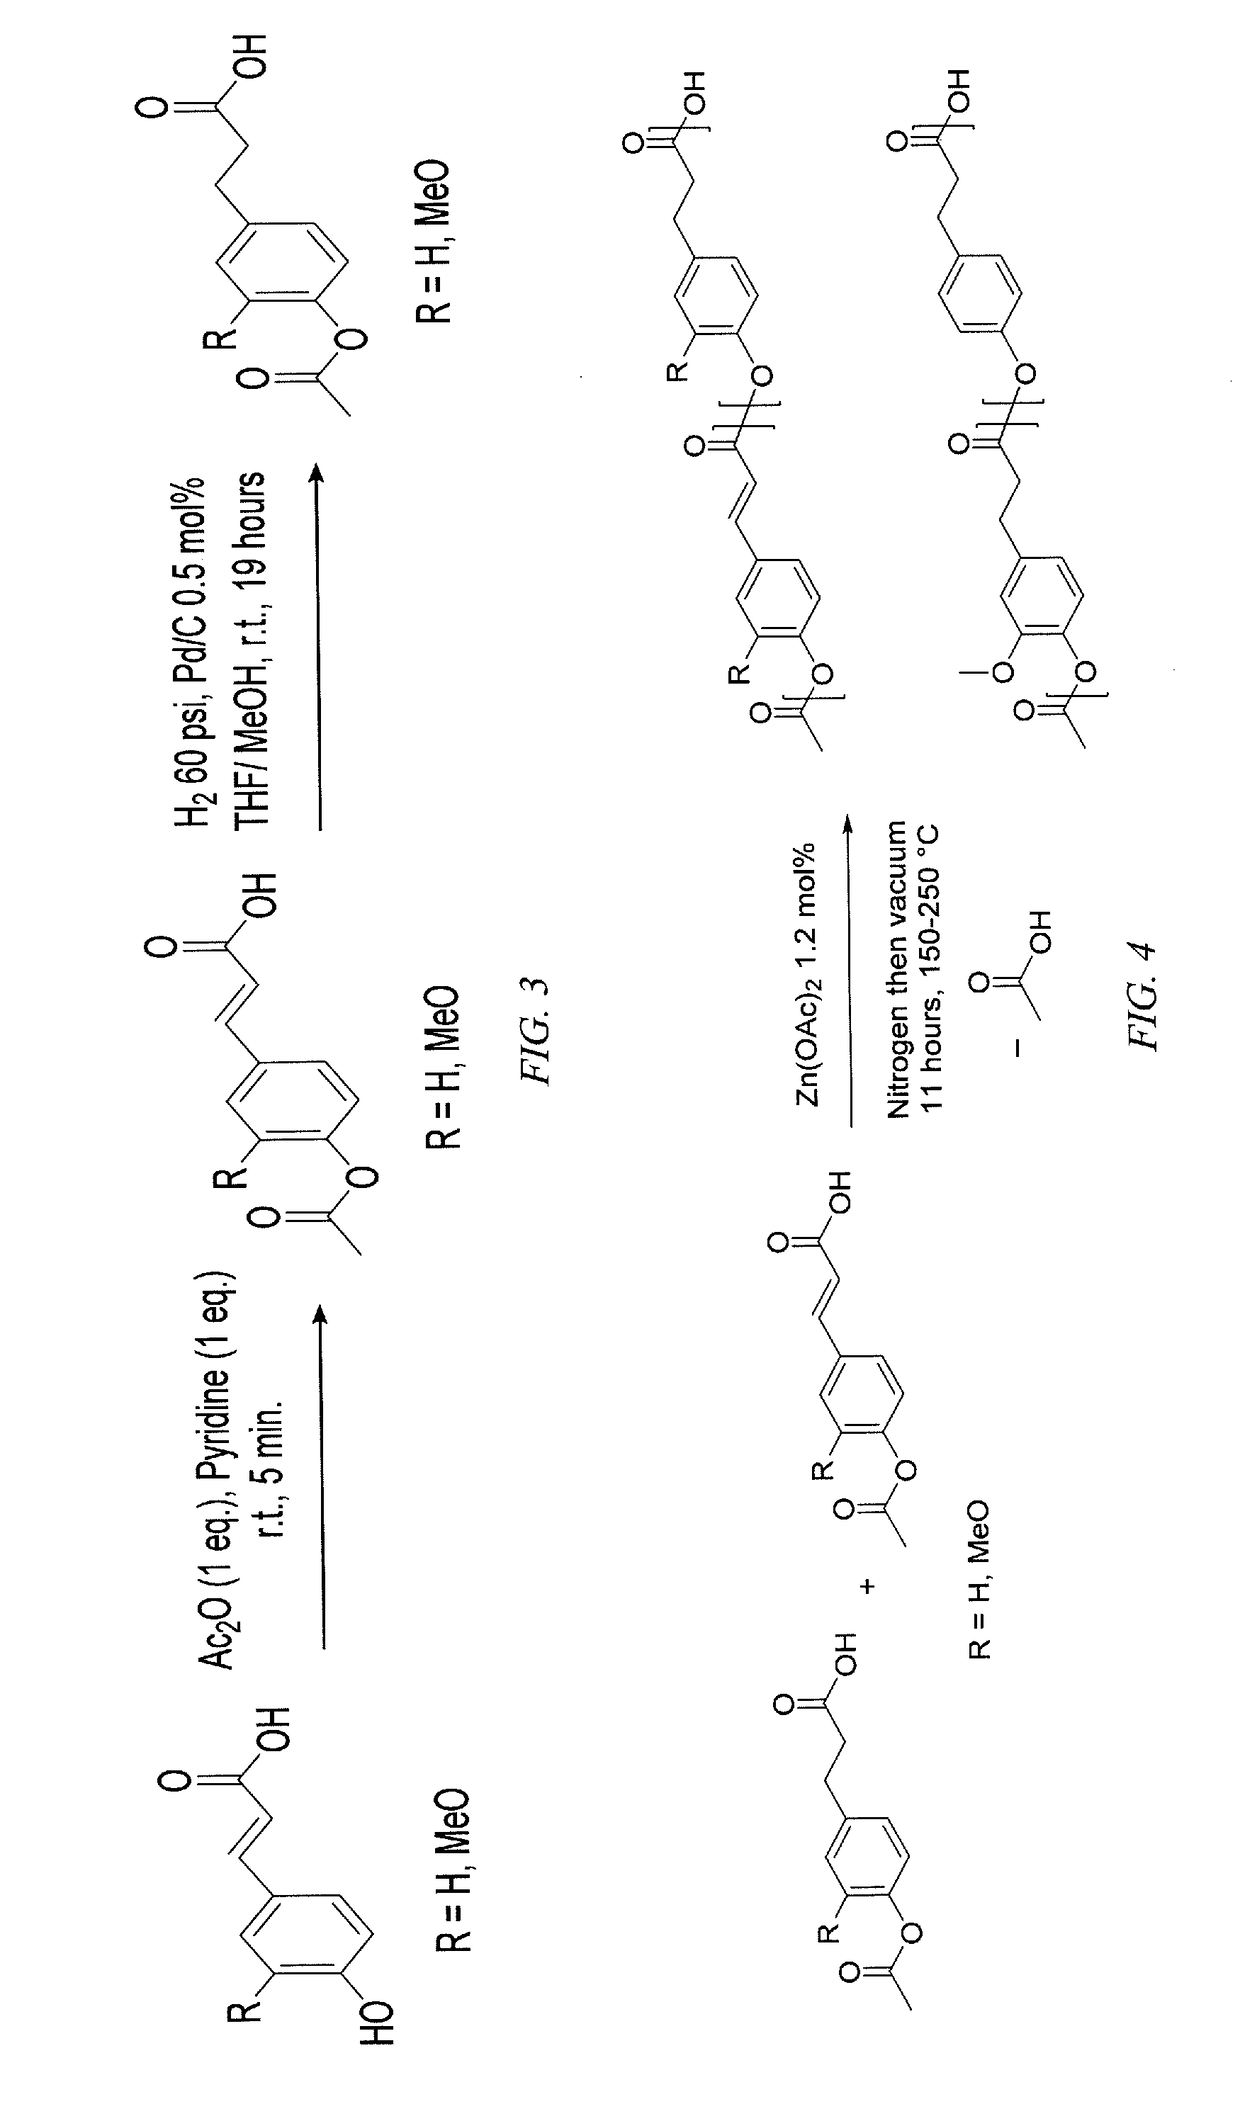 Ferulic acid and p-coumaric acid based polymers and copolymers